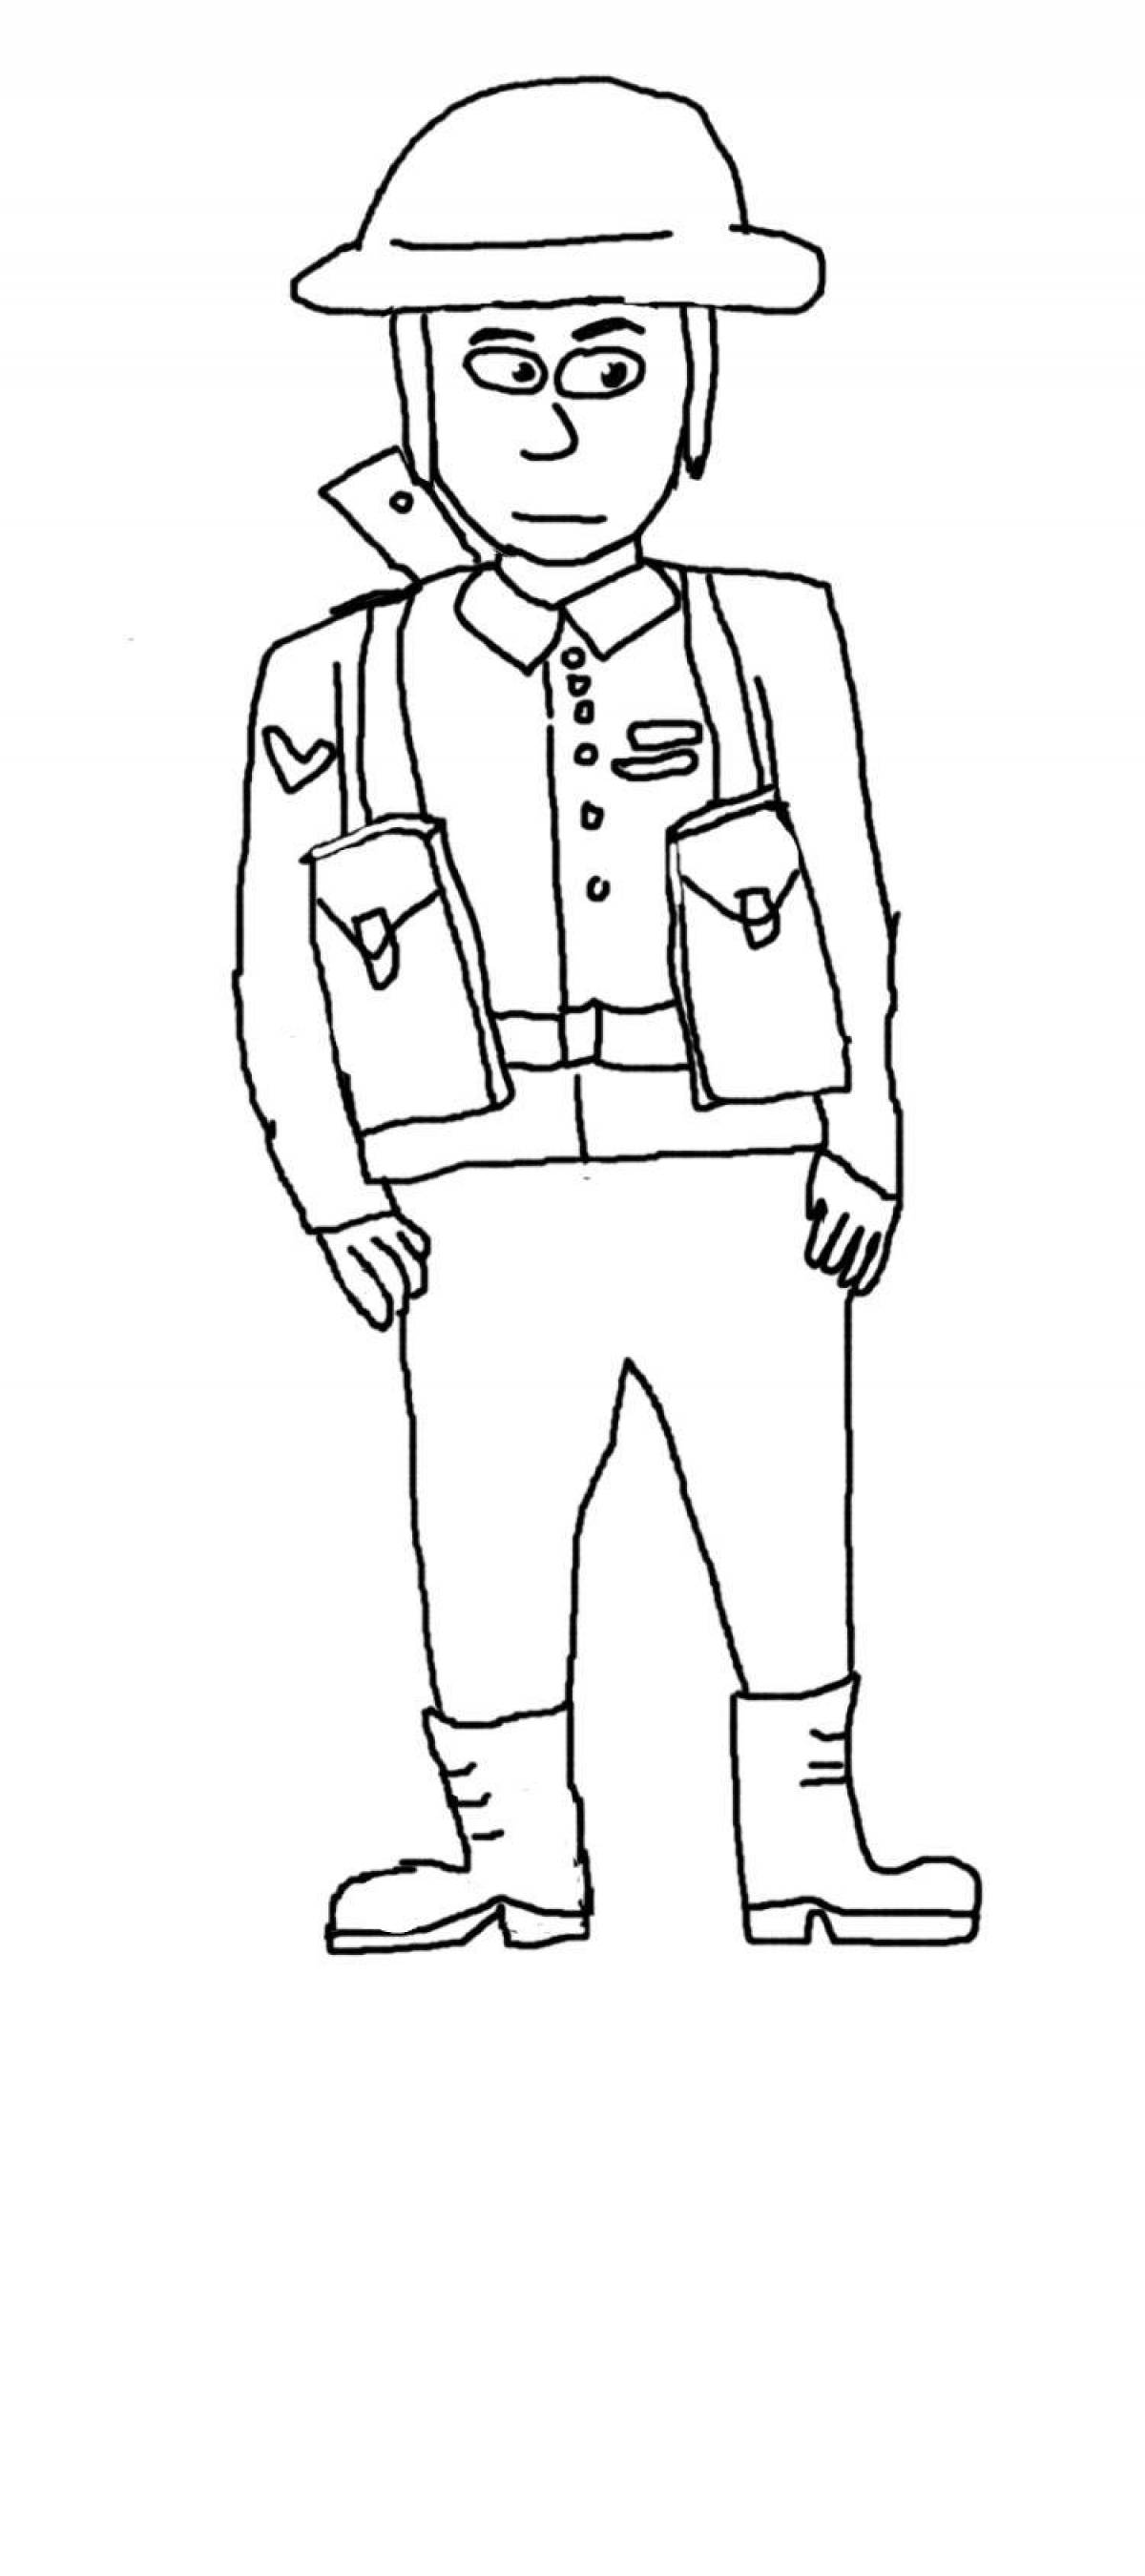 Funny soldier face coloring page for kids